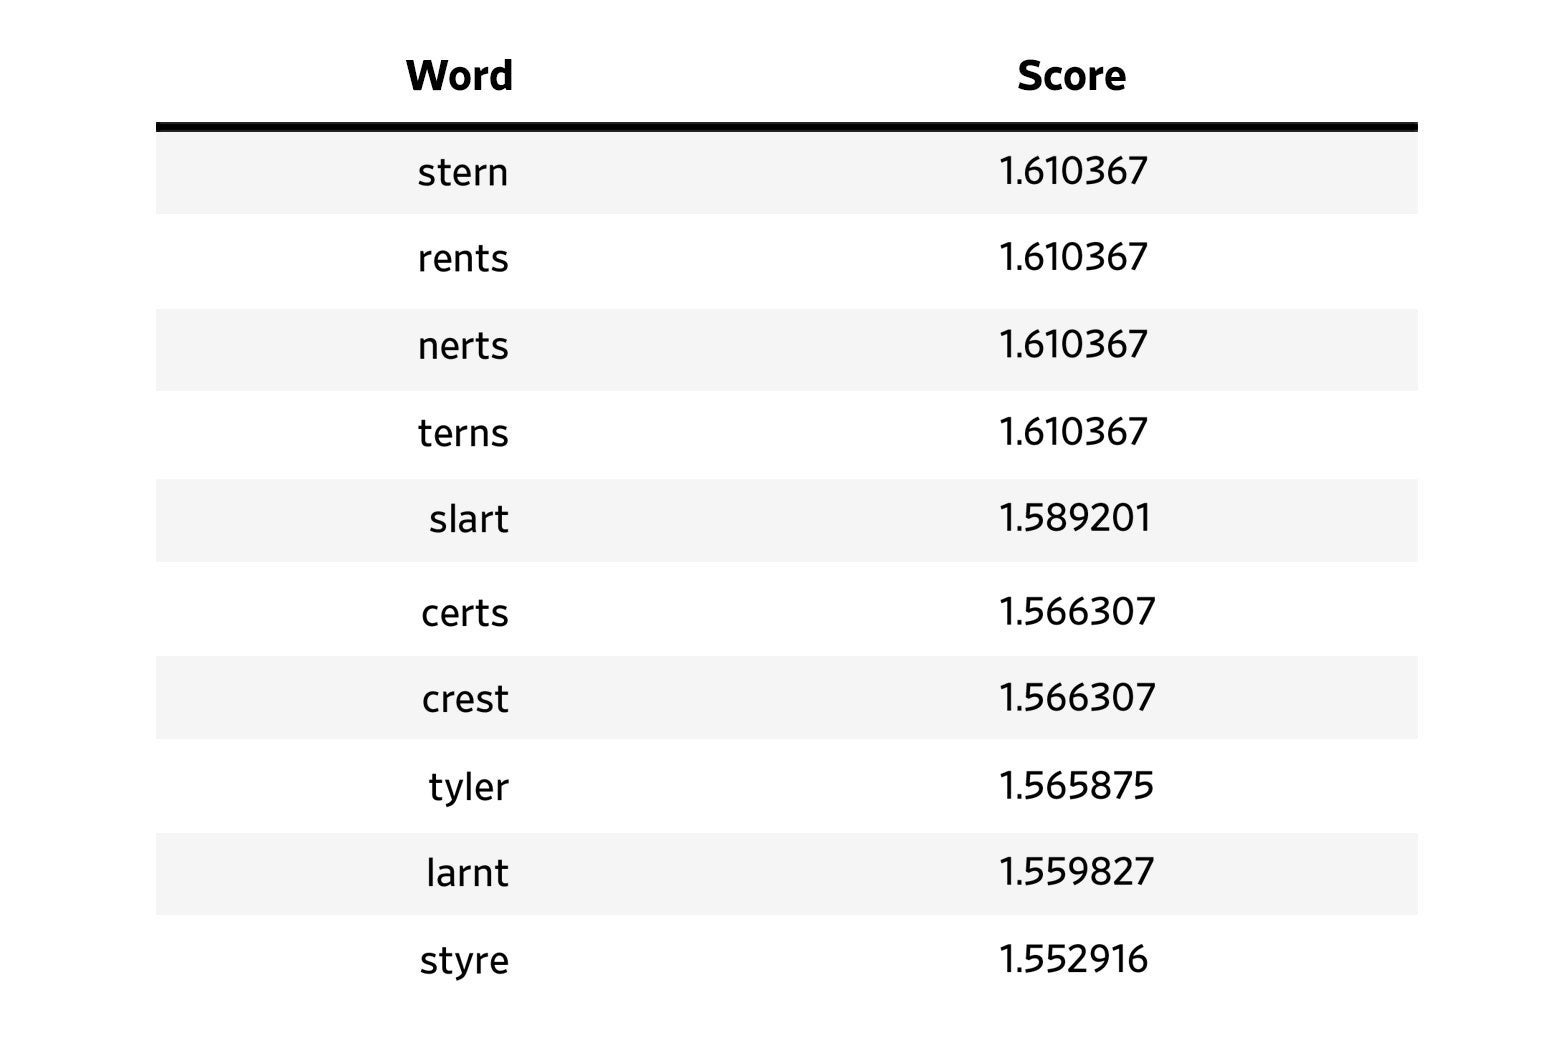 List of top 10 first guess words: stern, rents, nerts, terns, slart, certs, crest, tyler, larnt, styre